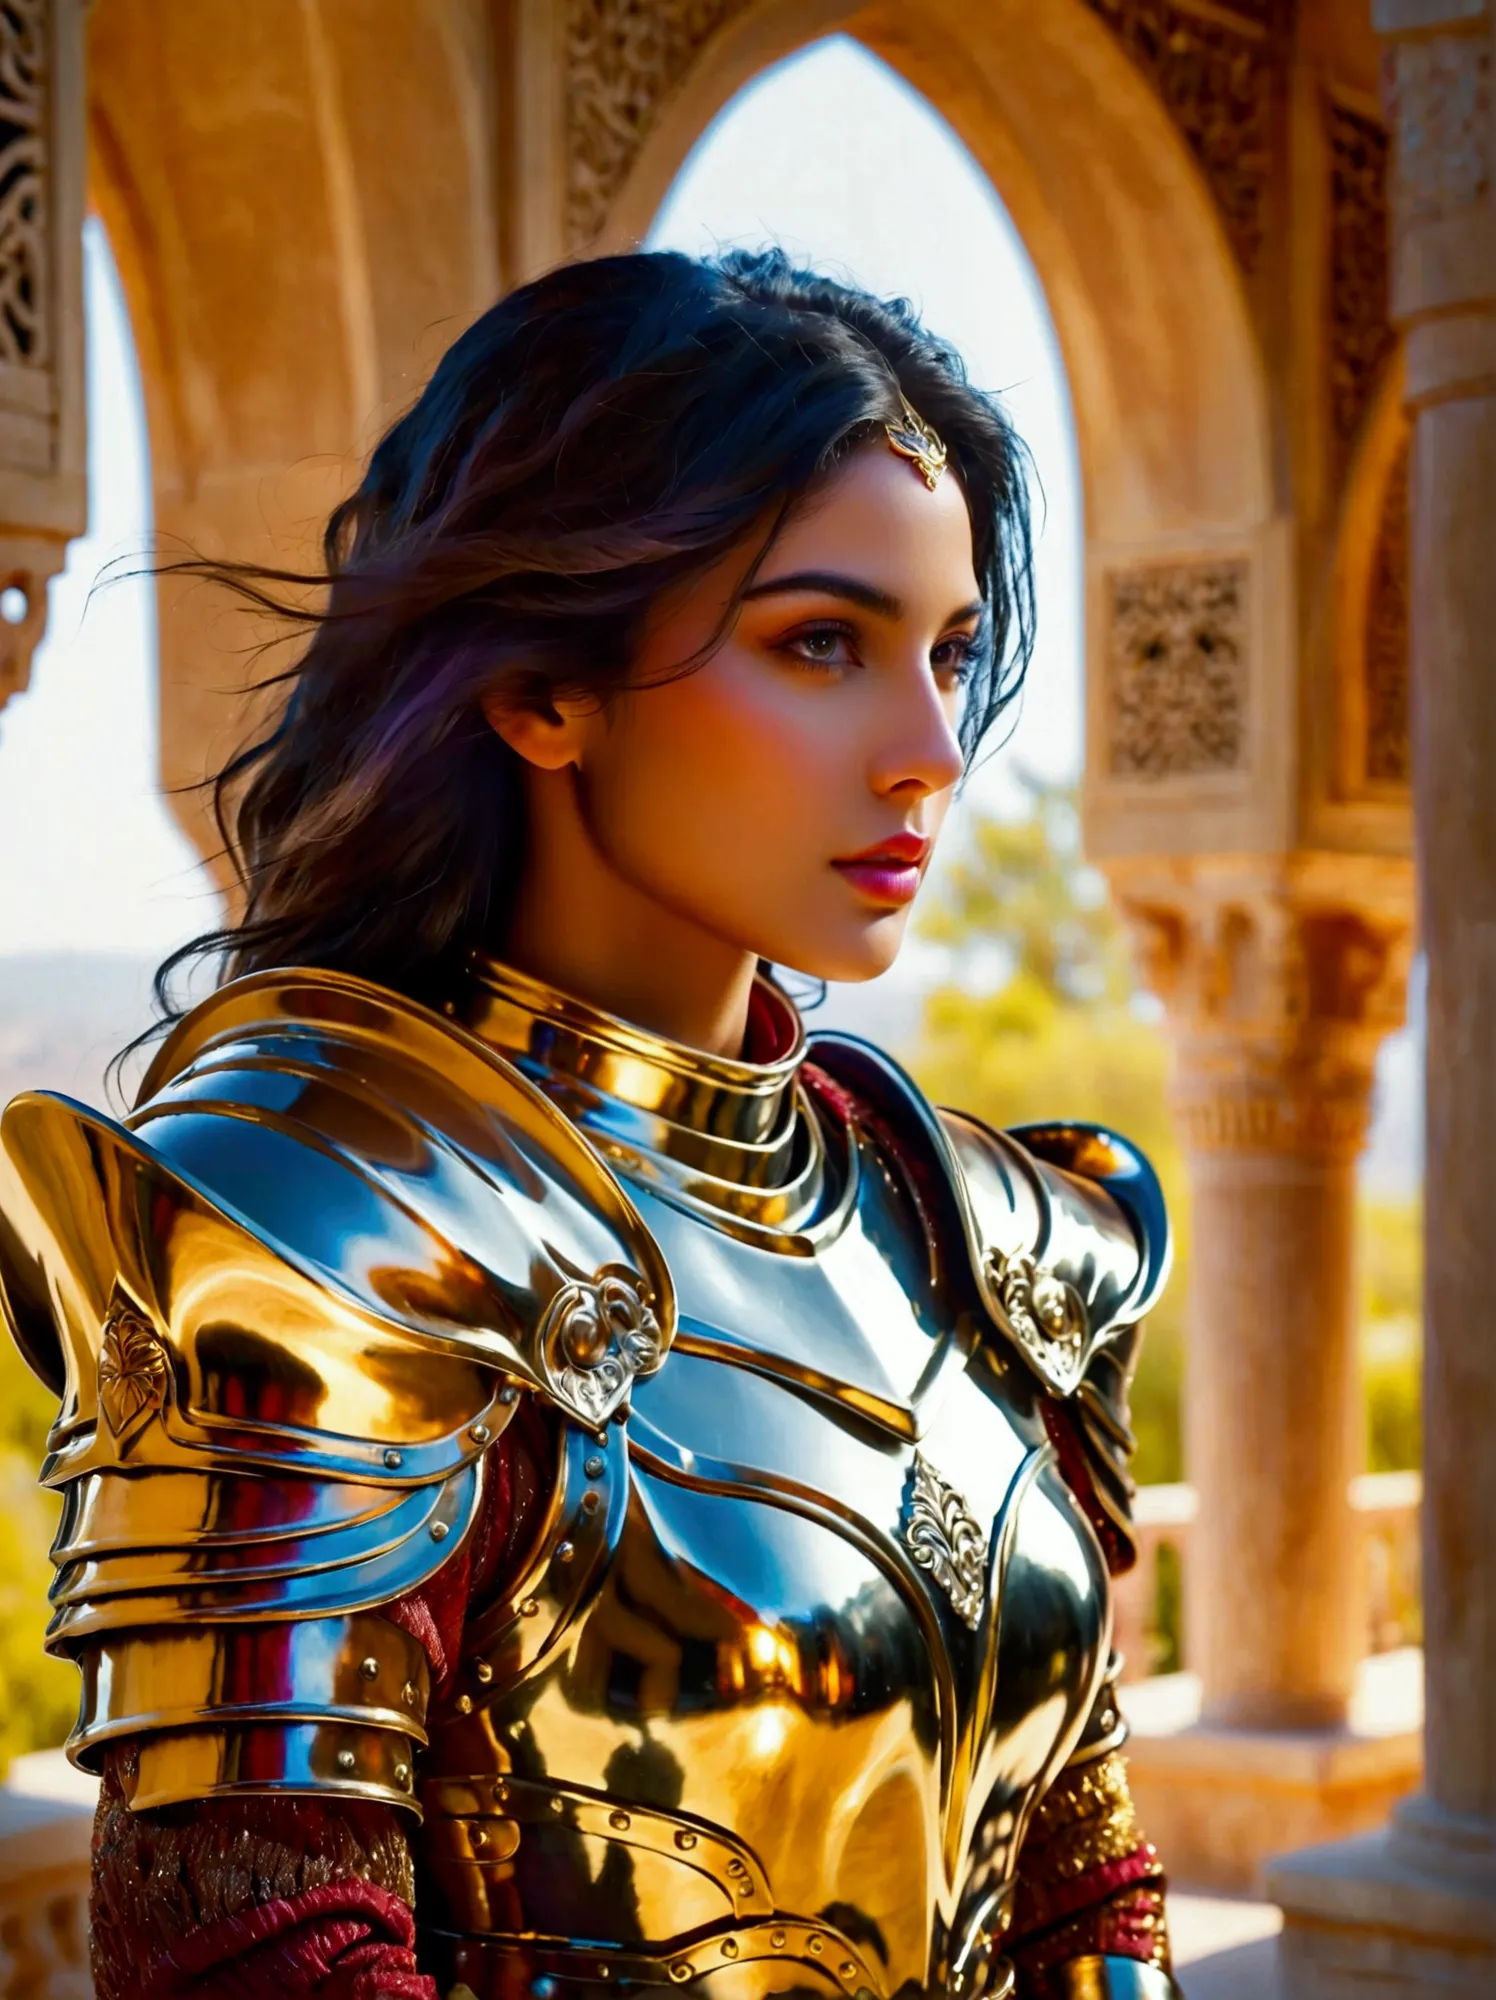 Visualize a Middle Eastern female knight garbed in glittering, shiny armor. Her color-rich attire should reflect a contemporary ...